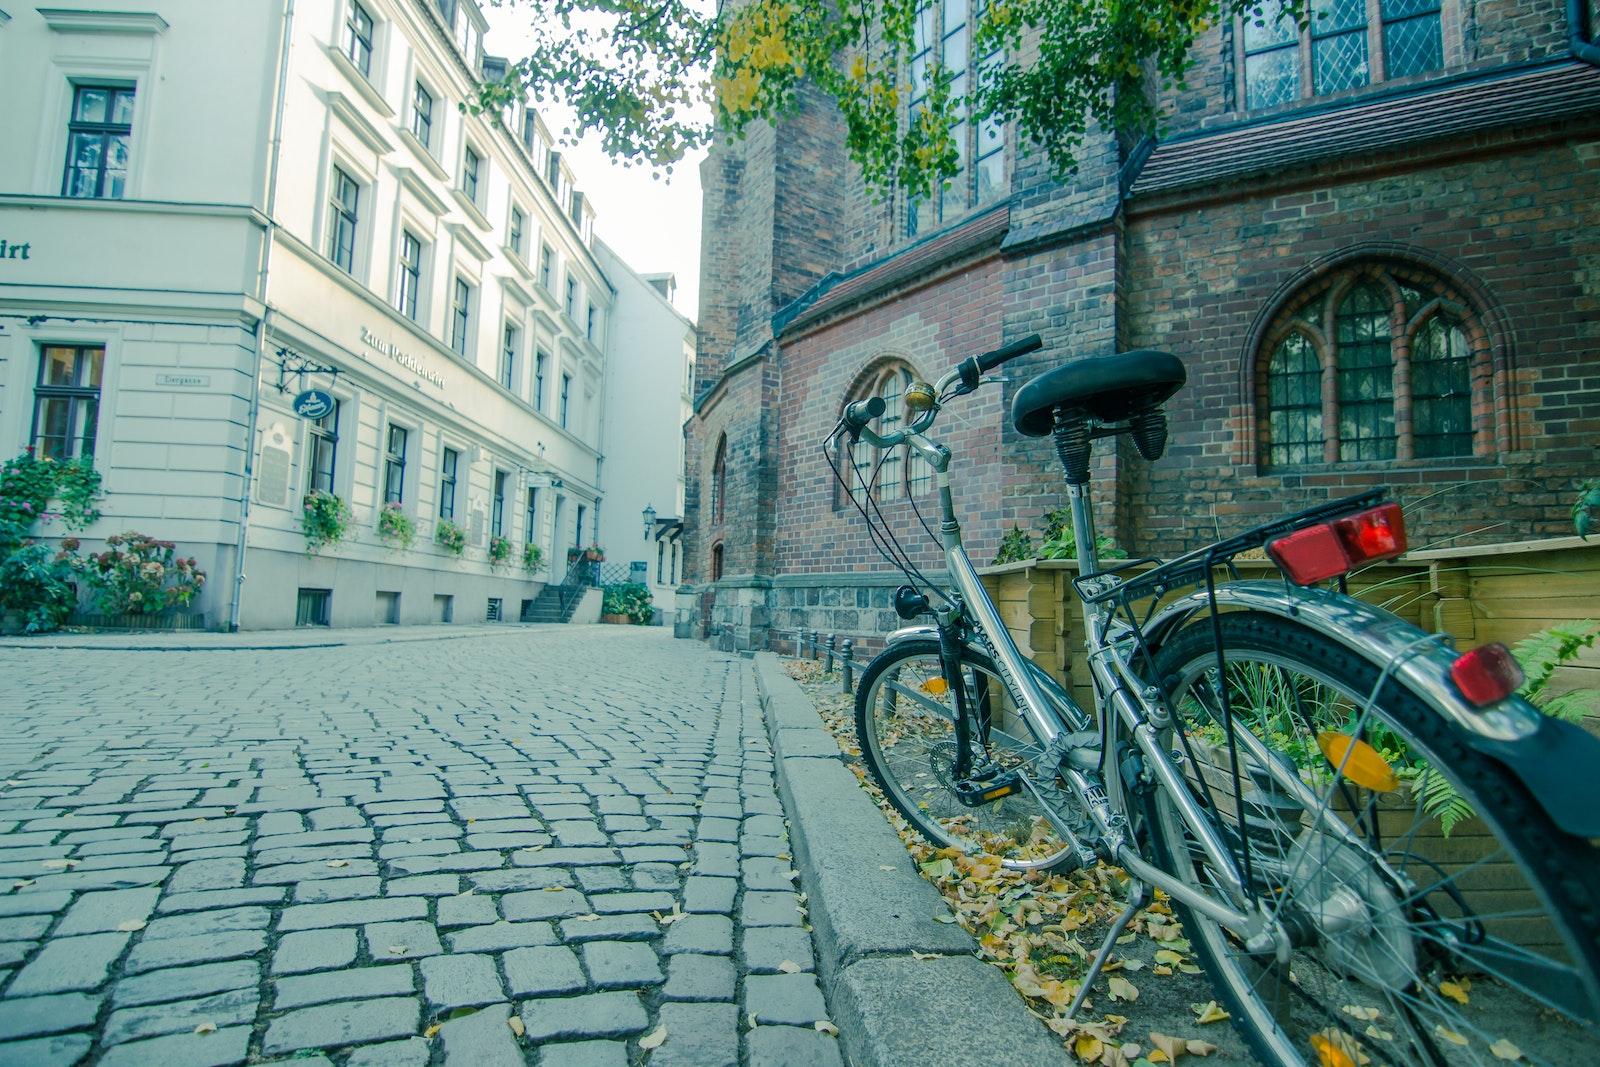 Parked Bicycle Near Building